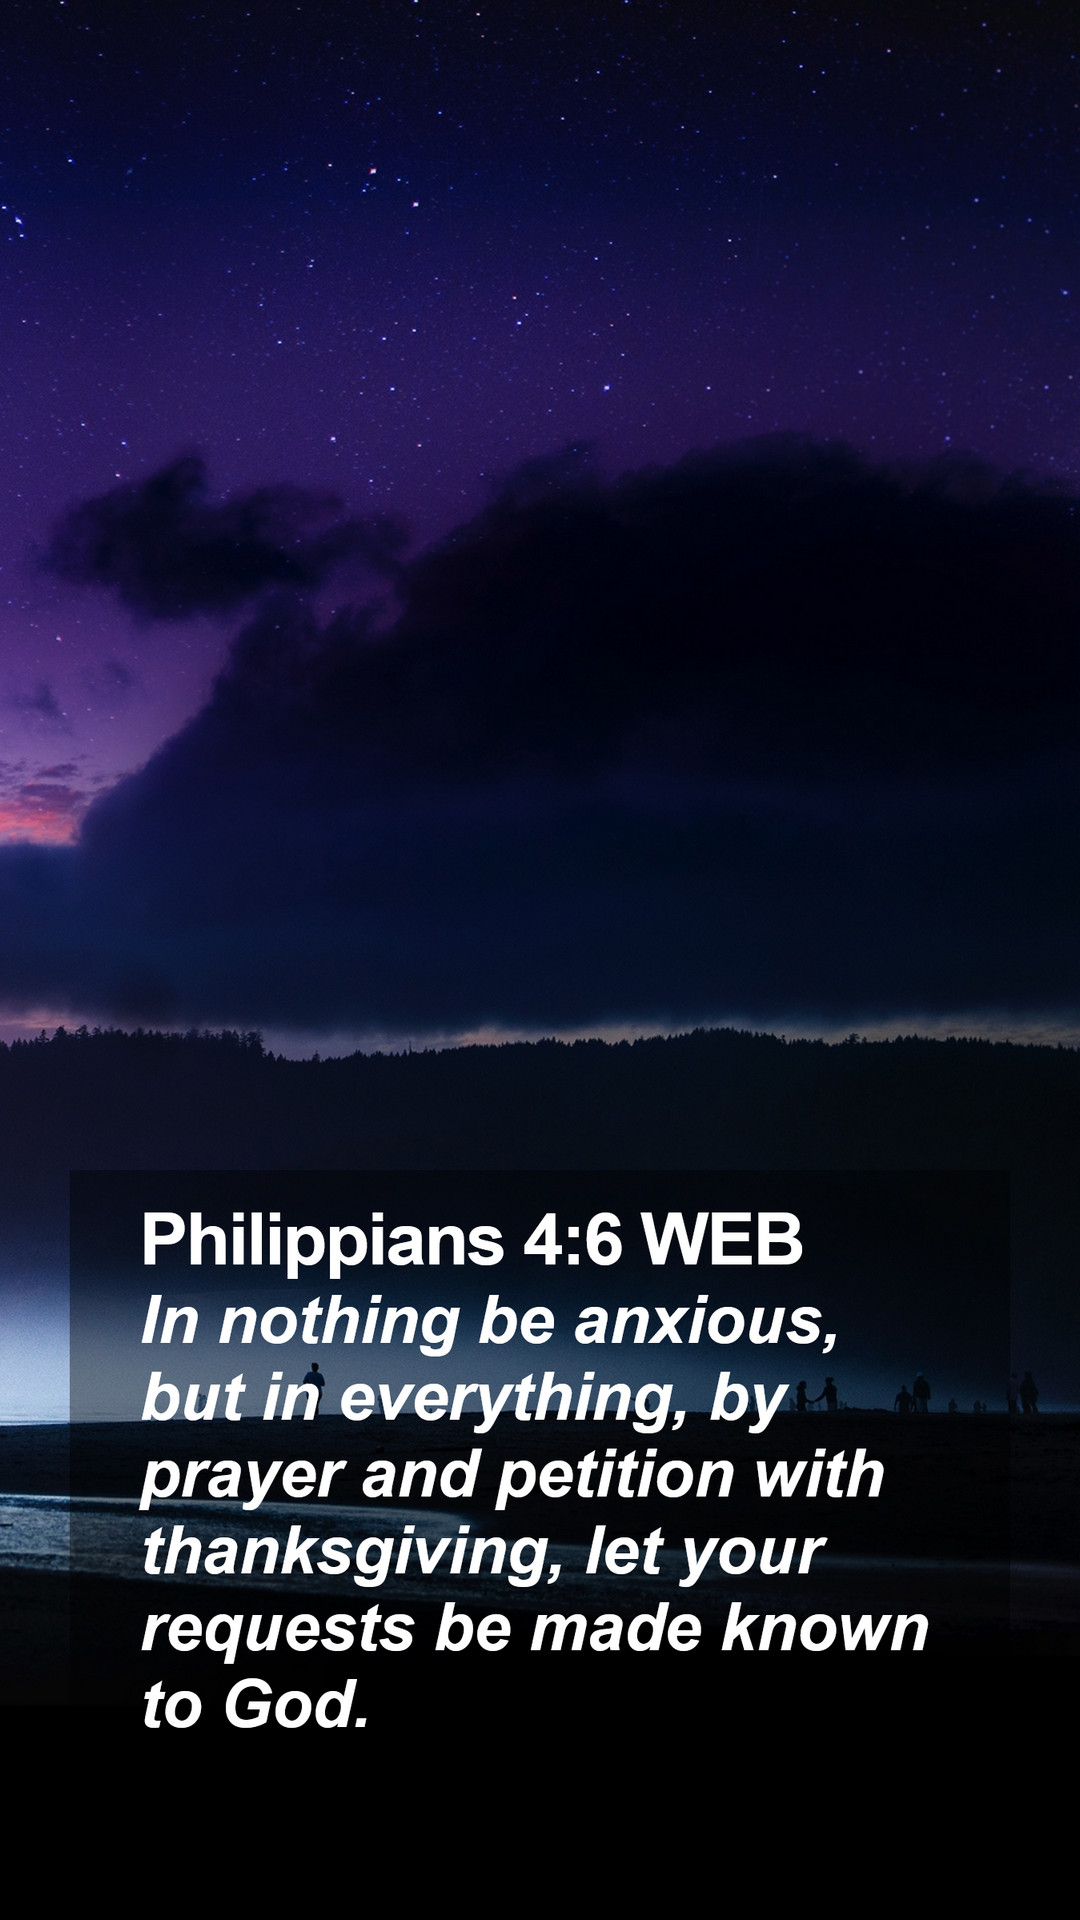 Philippians 4:6 WEB Mobile Phone Wallpaper nothing be anxious, but in everything, by